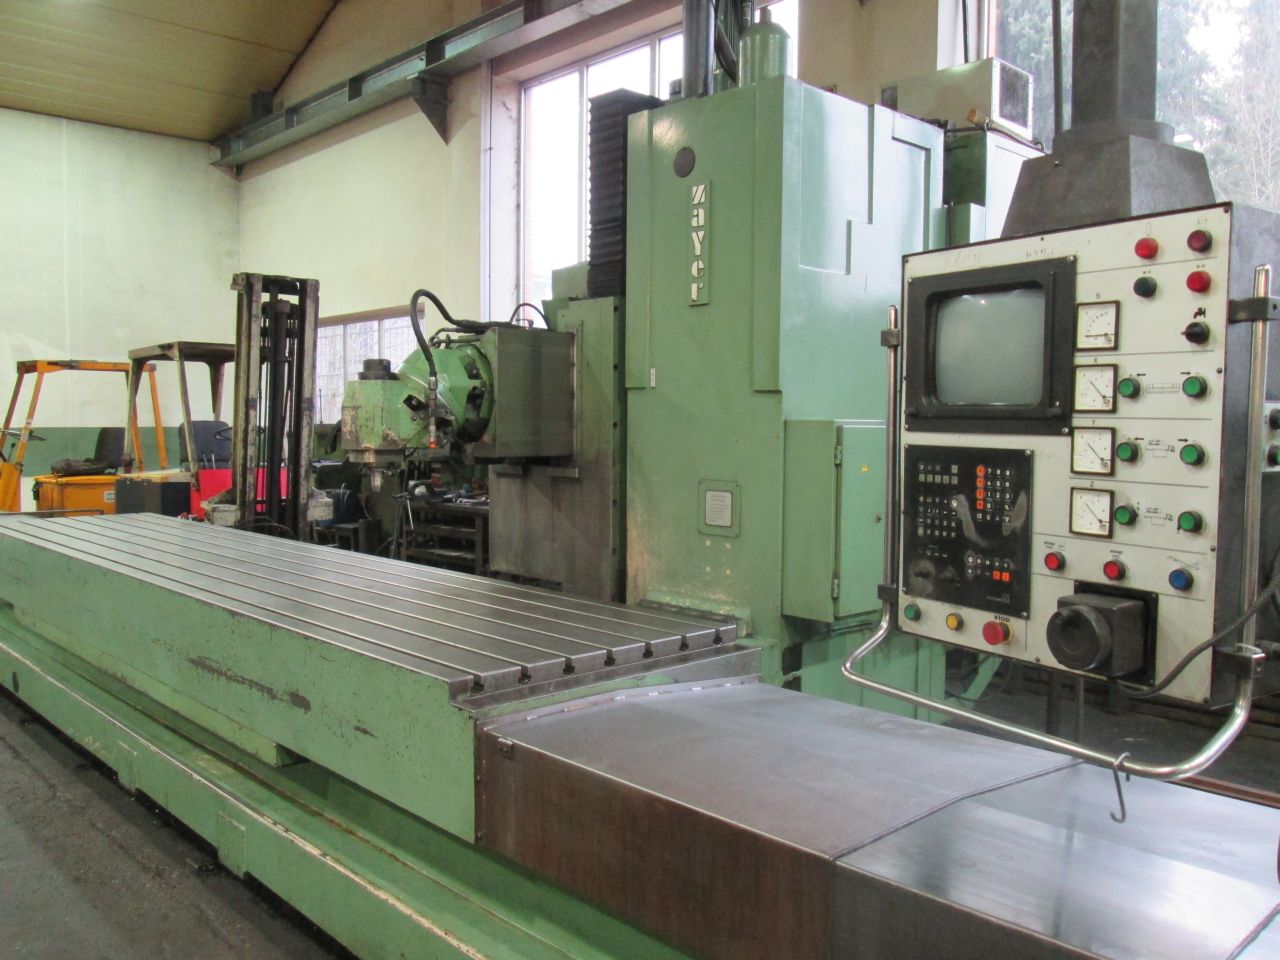 Bed Type Milling/ZAYER KF 5000 (12.497L)